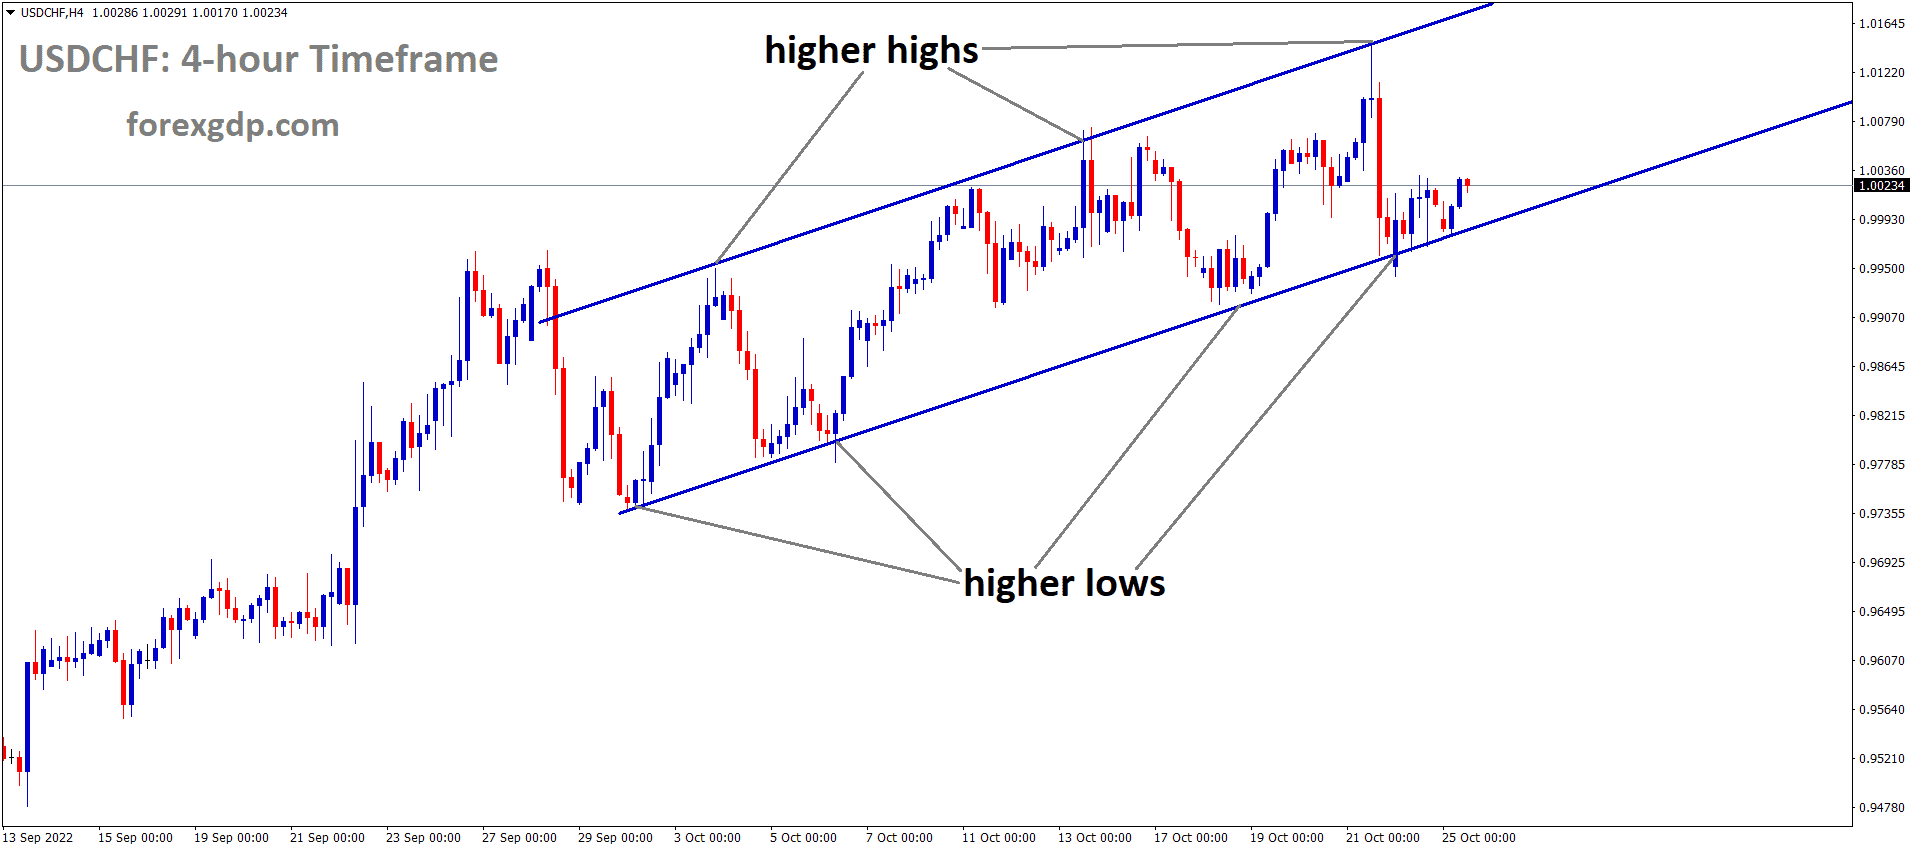 USDCHF is moving in an Ascending channel and the market has rebounded from the higher low area of the channel 2